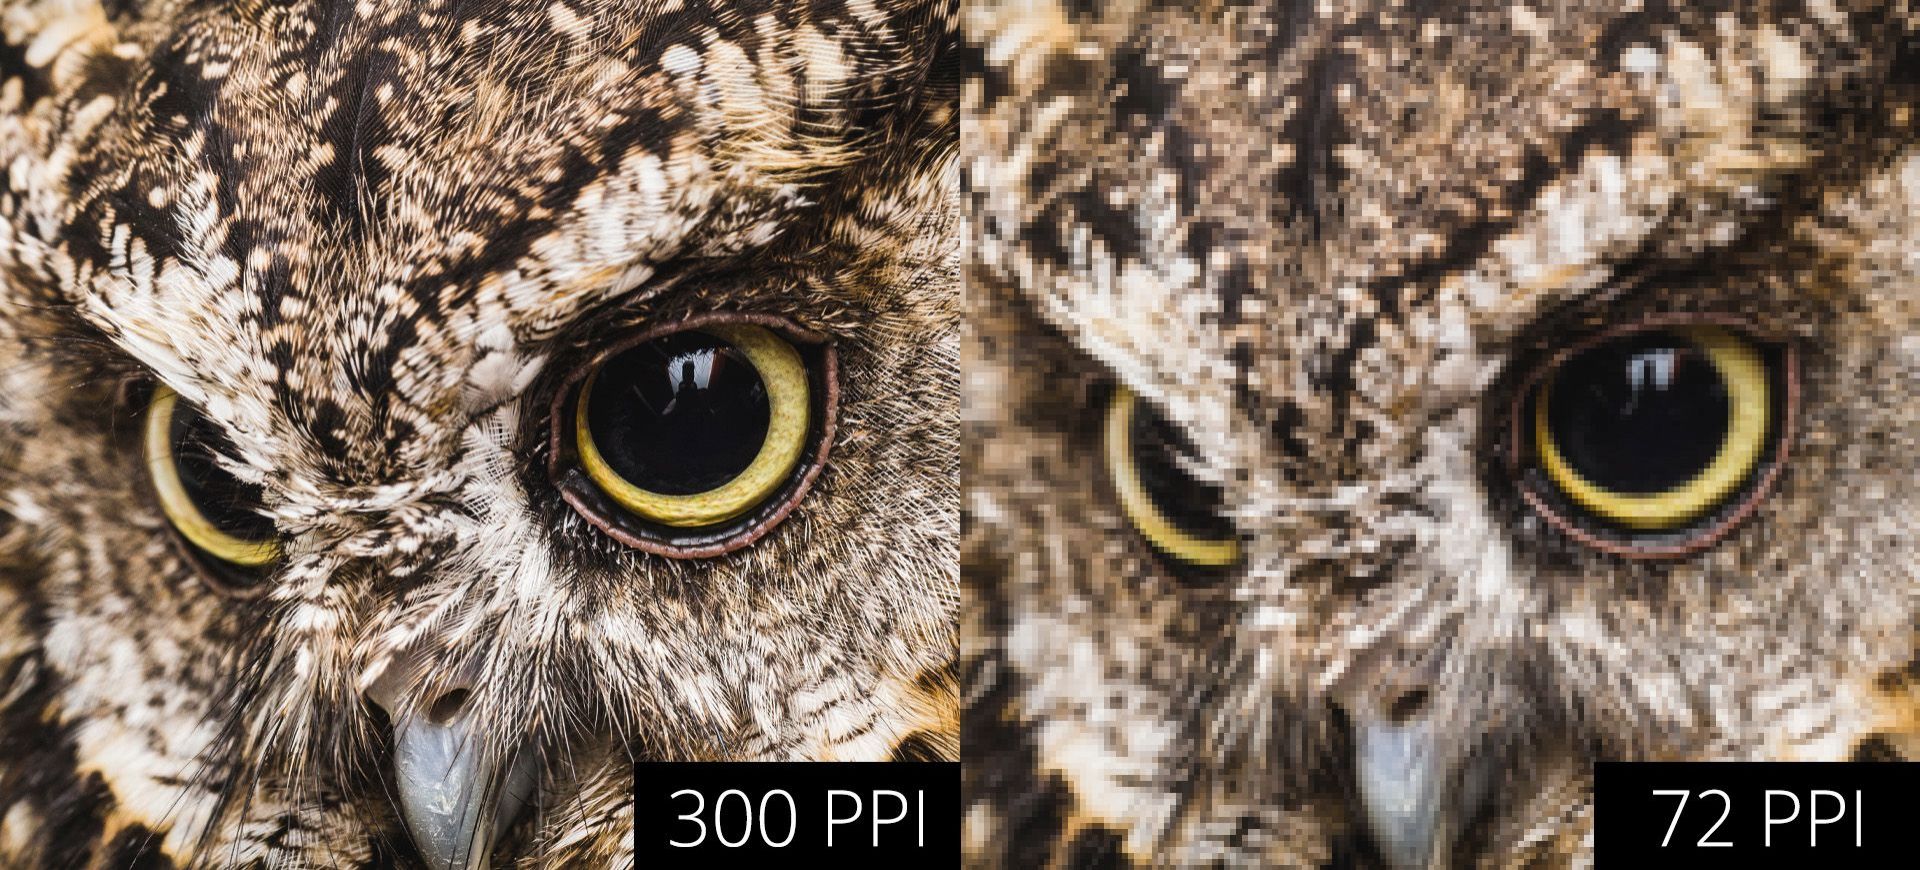 How To Get The Best Image Resolution